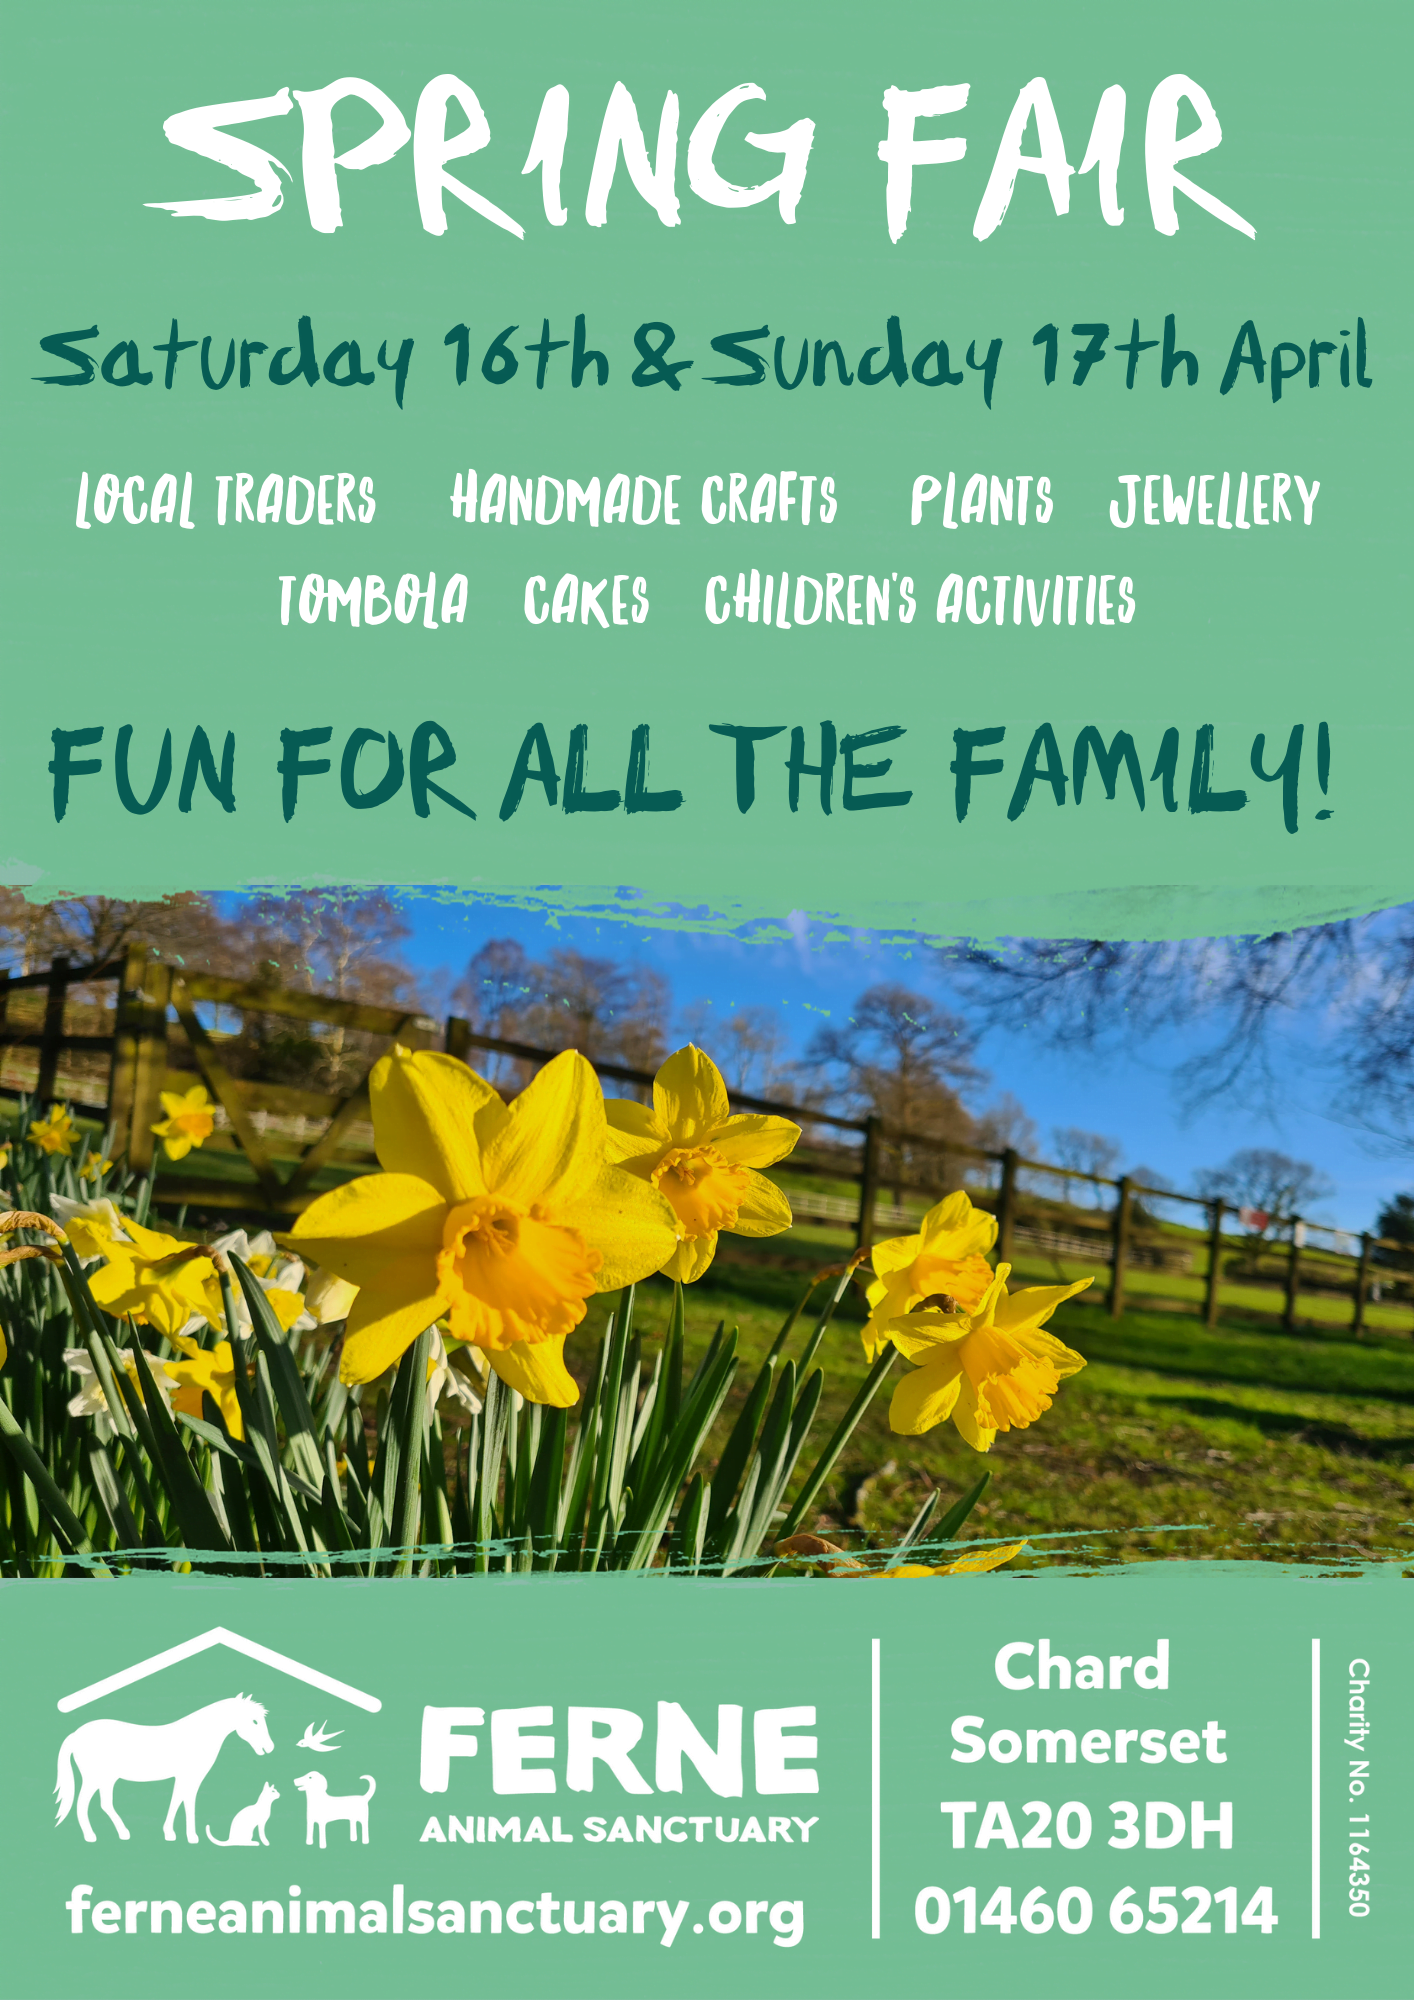 The Spring Fair is Coming!